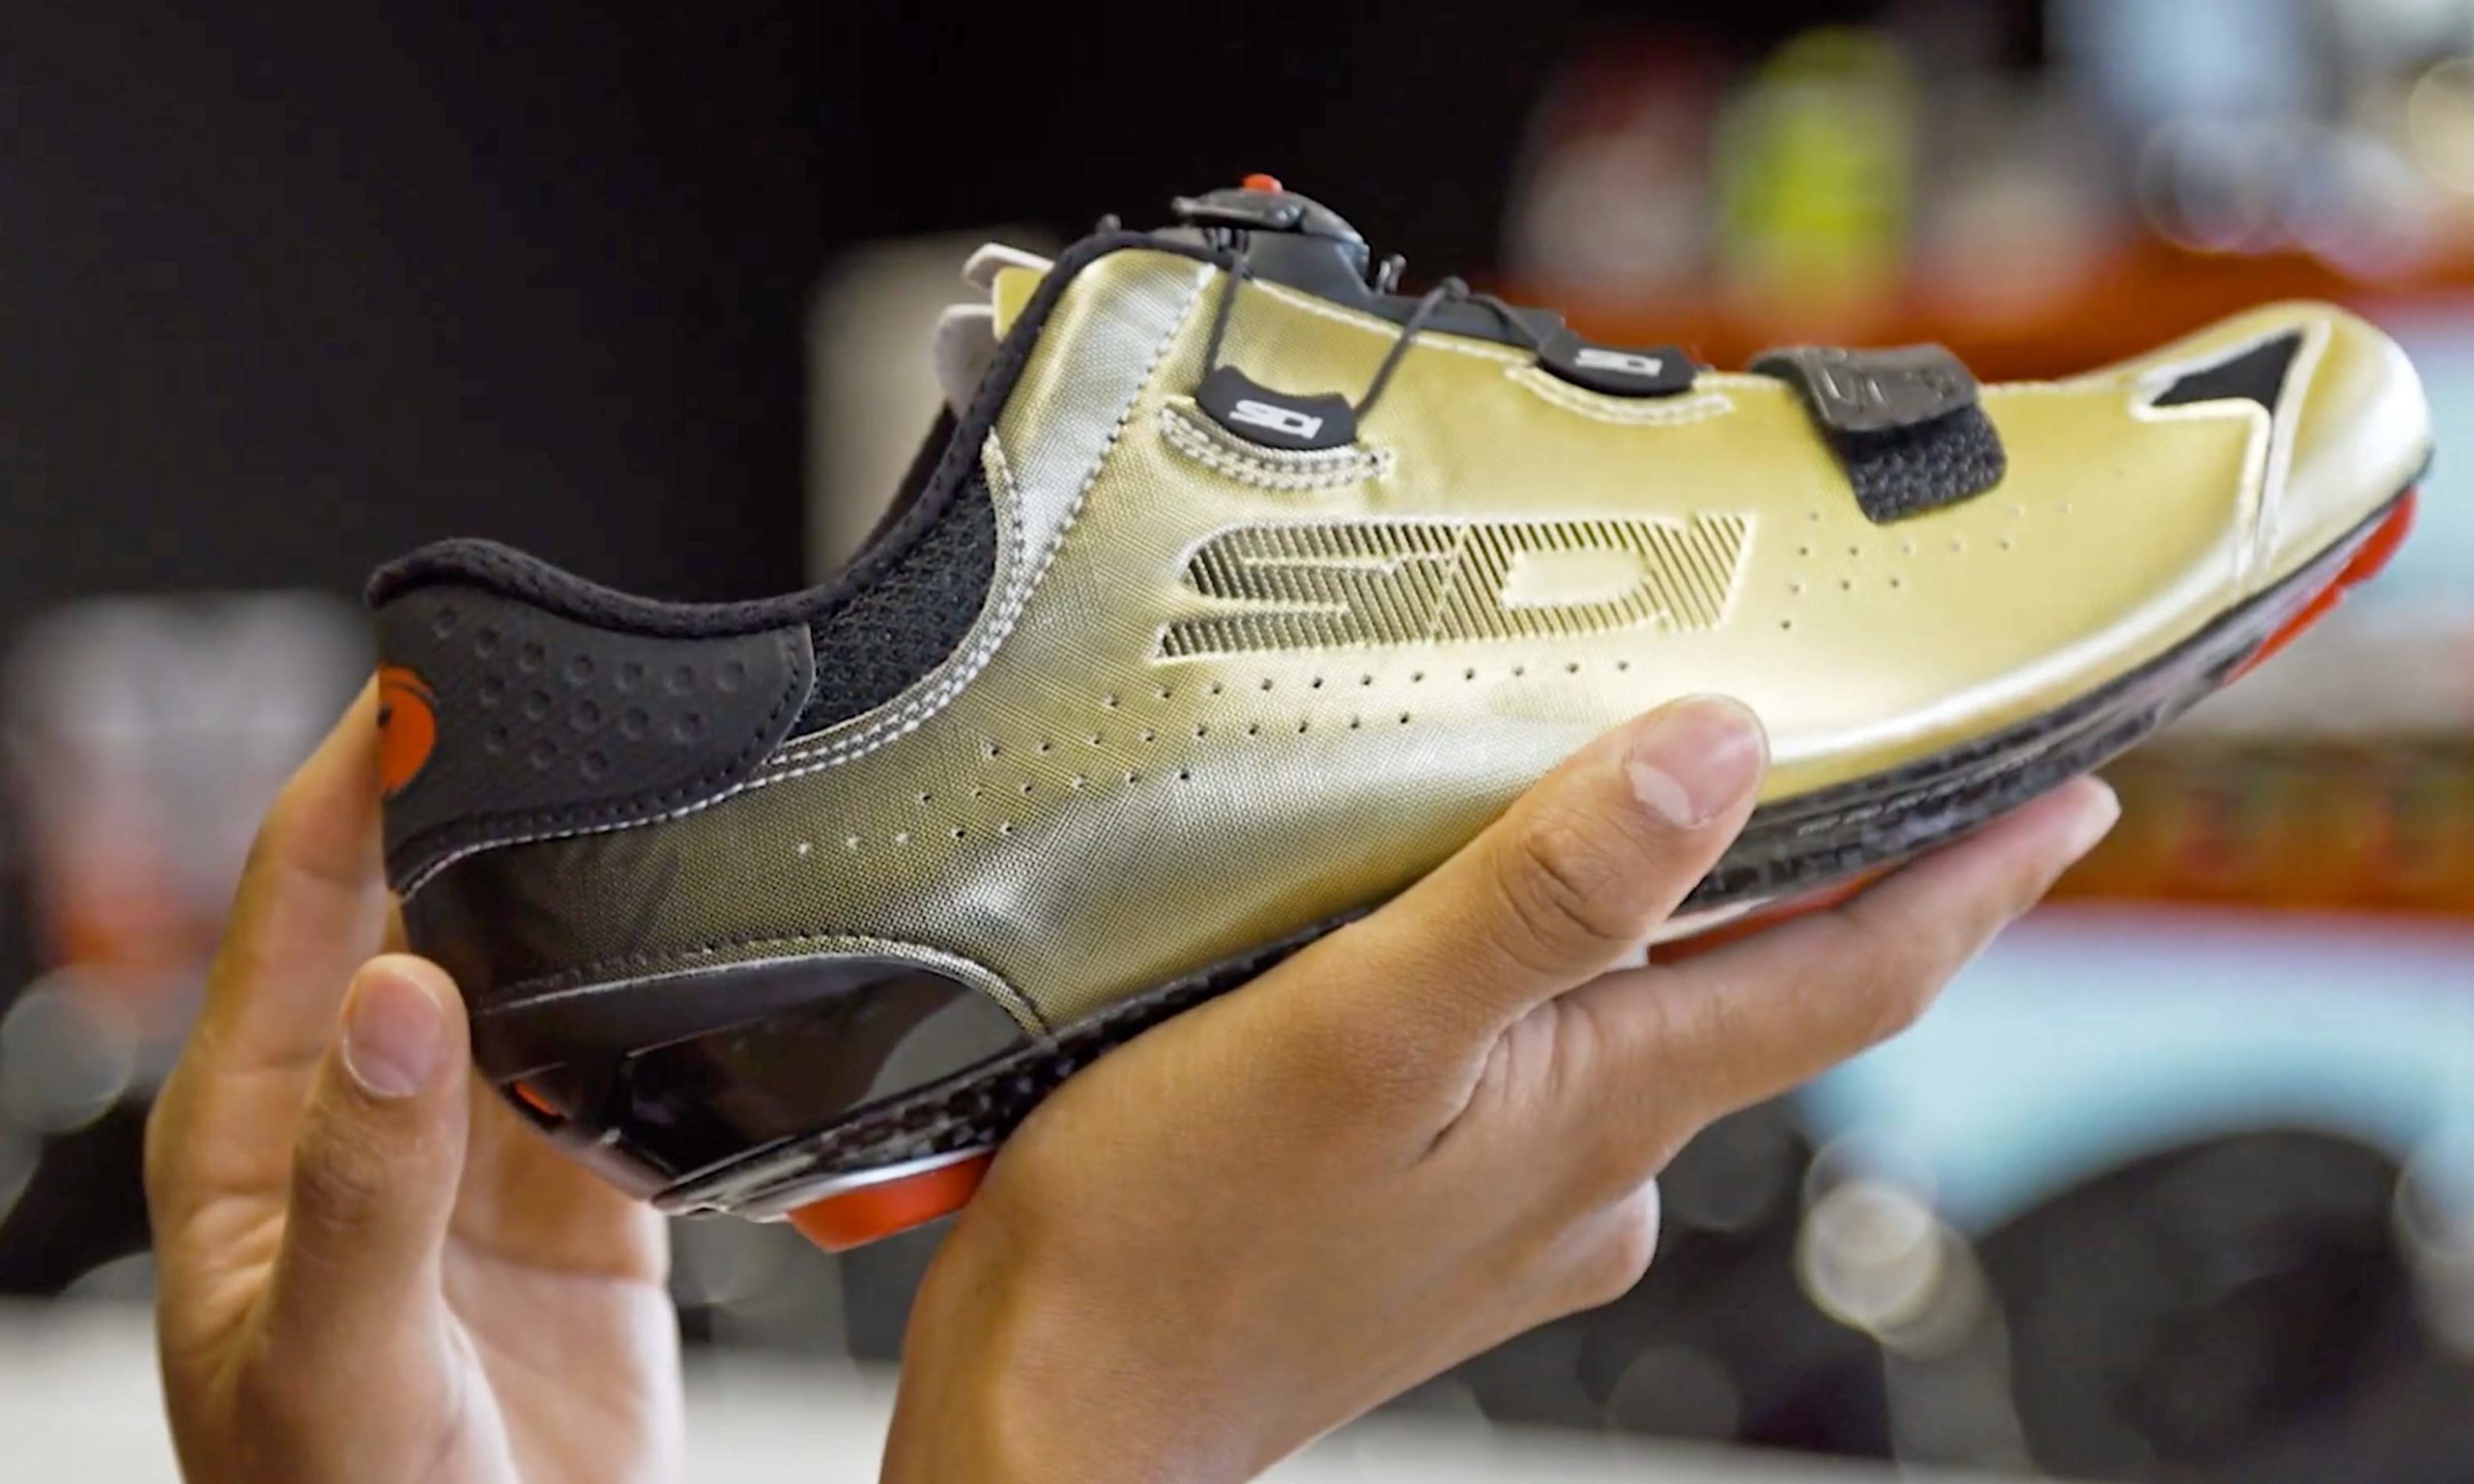 Sidi Sixty Gold shines even more, now 